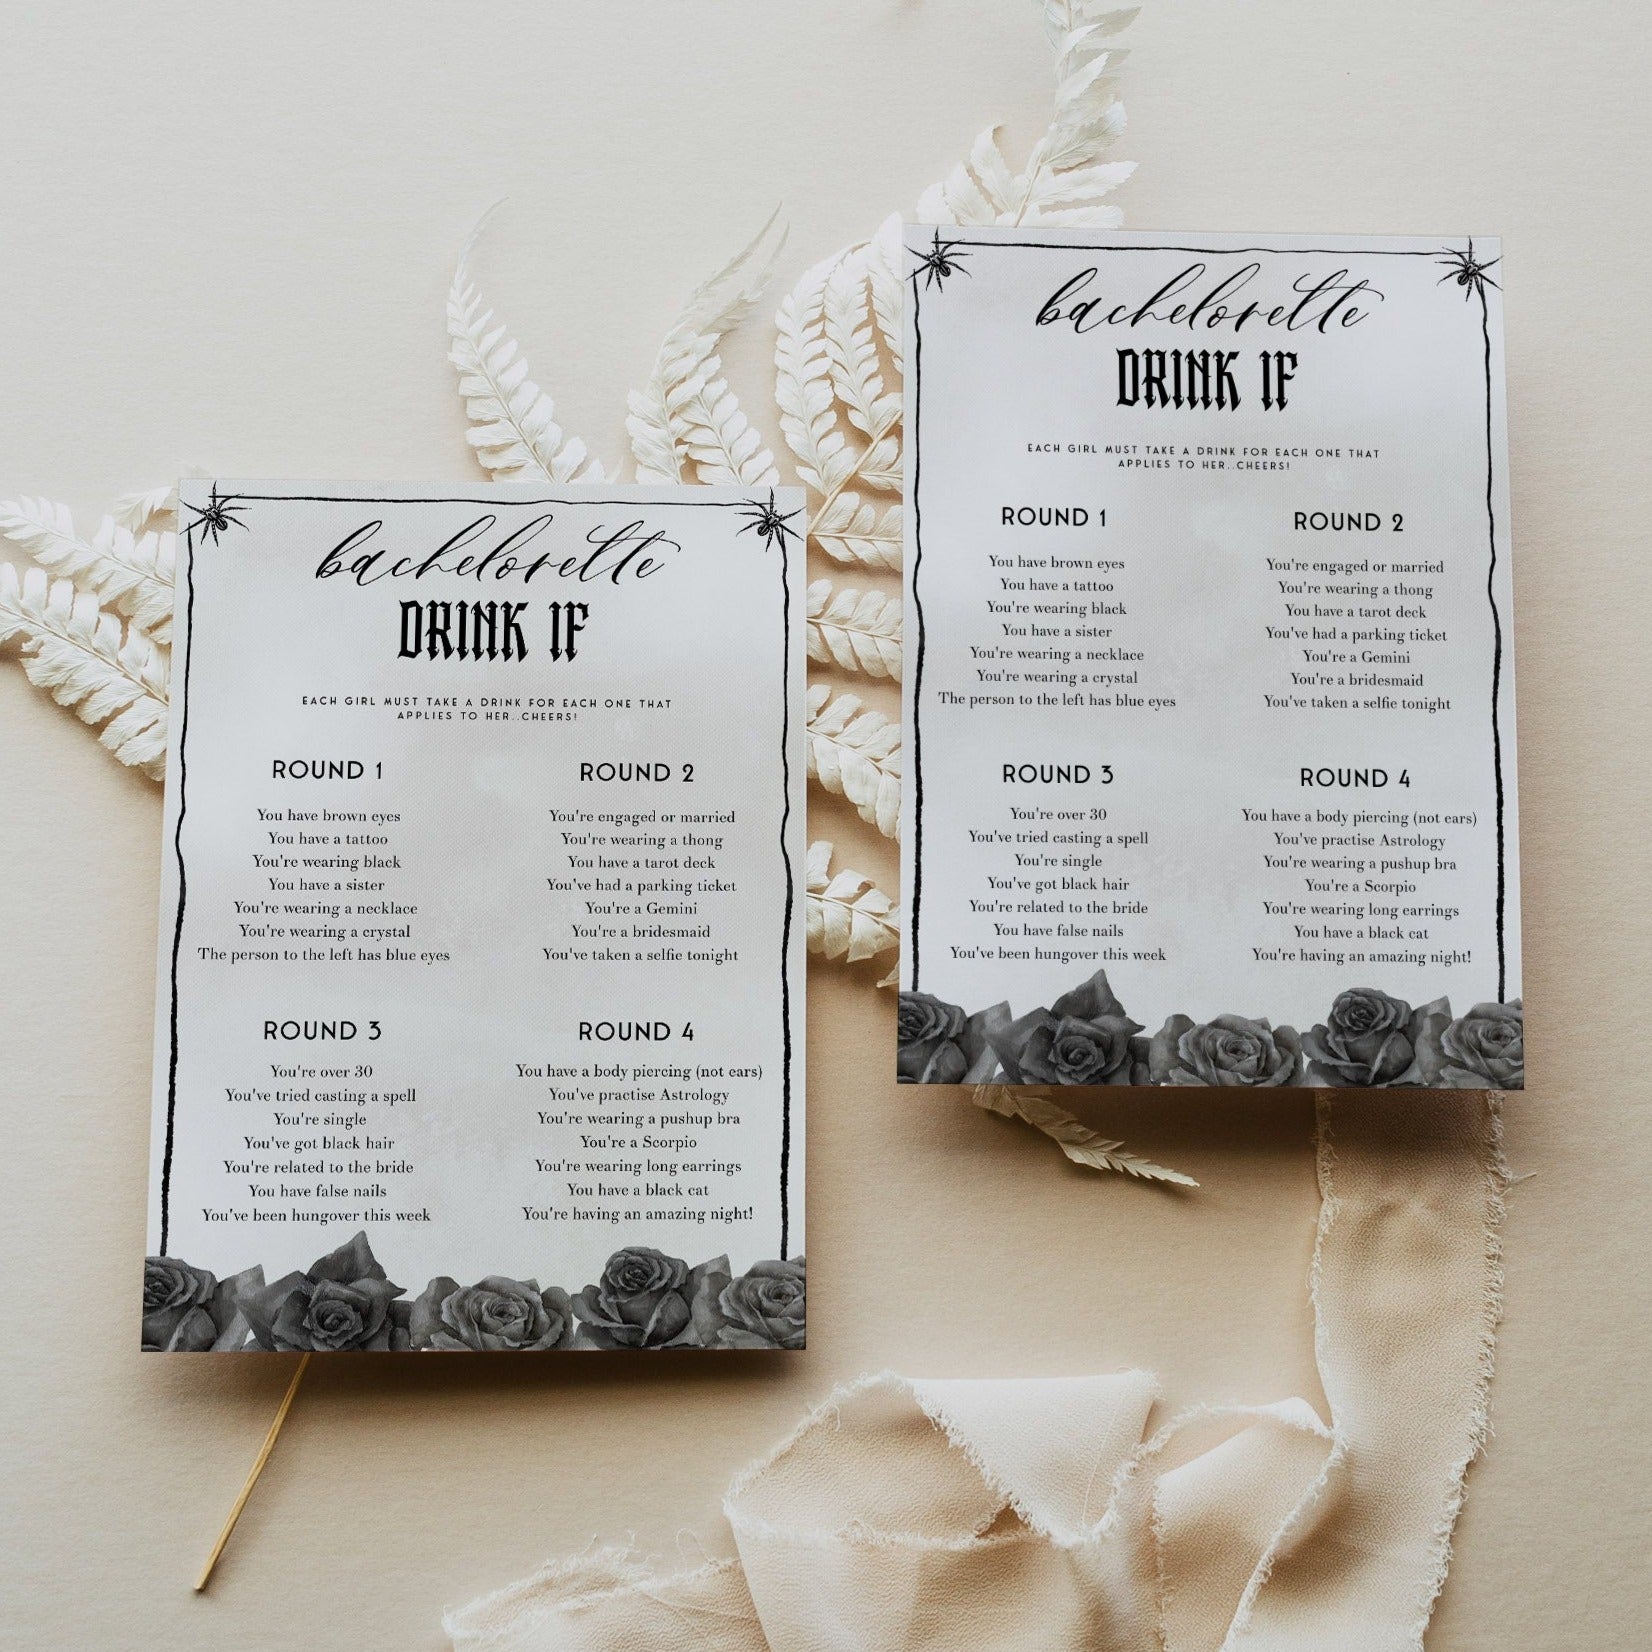 Fully editable and printable bridal shower bachelorette Drink If game with a gothic design. Perfect for a Bride or Die or Death Us To Party bridal shower themed party